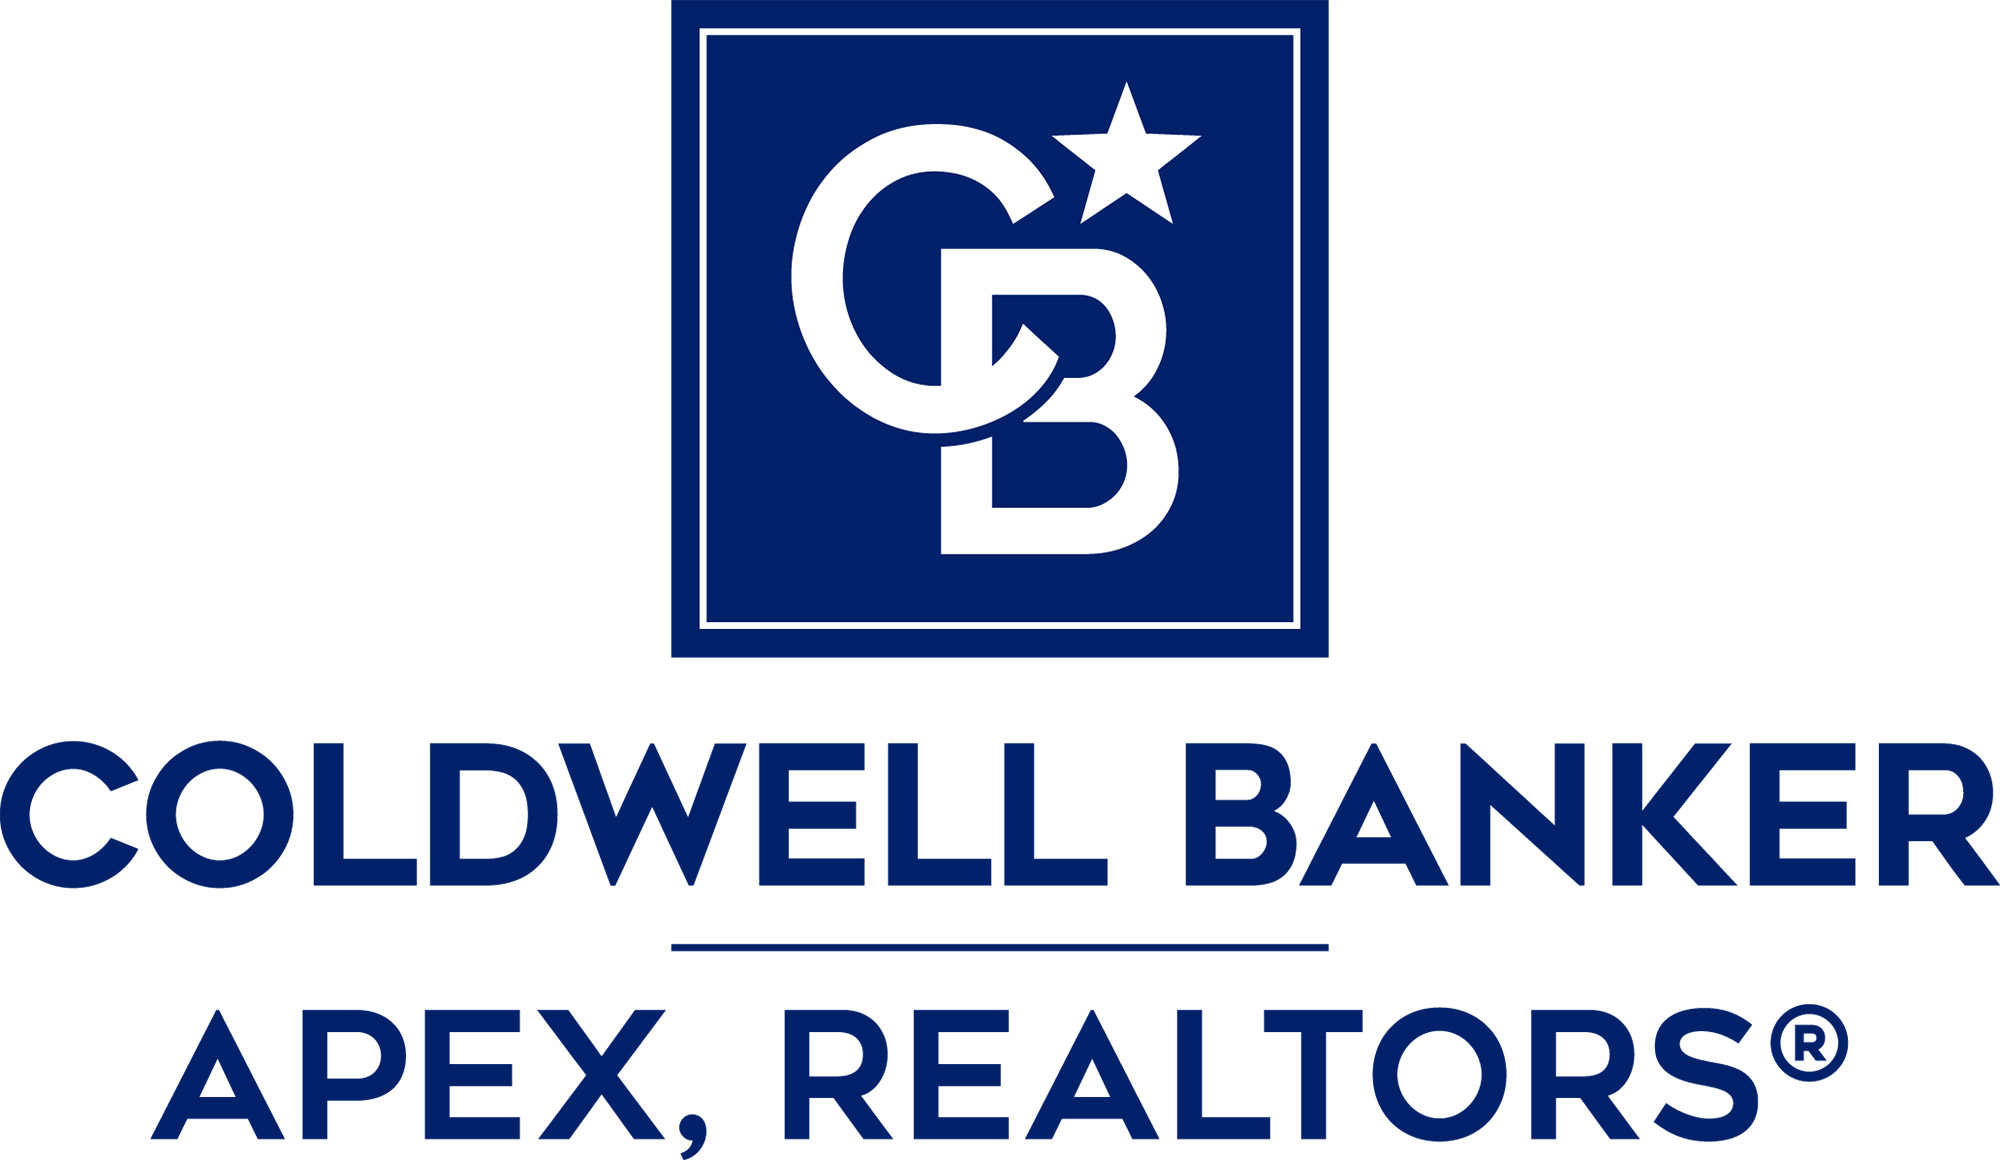 Katie Ruffino - Coldwell Banker AG Town Logo